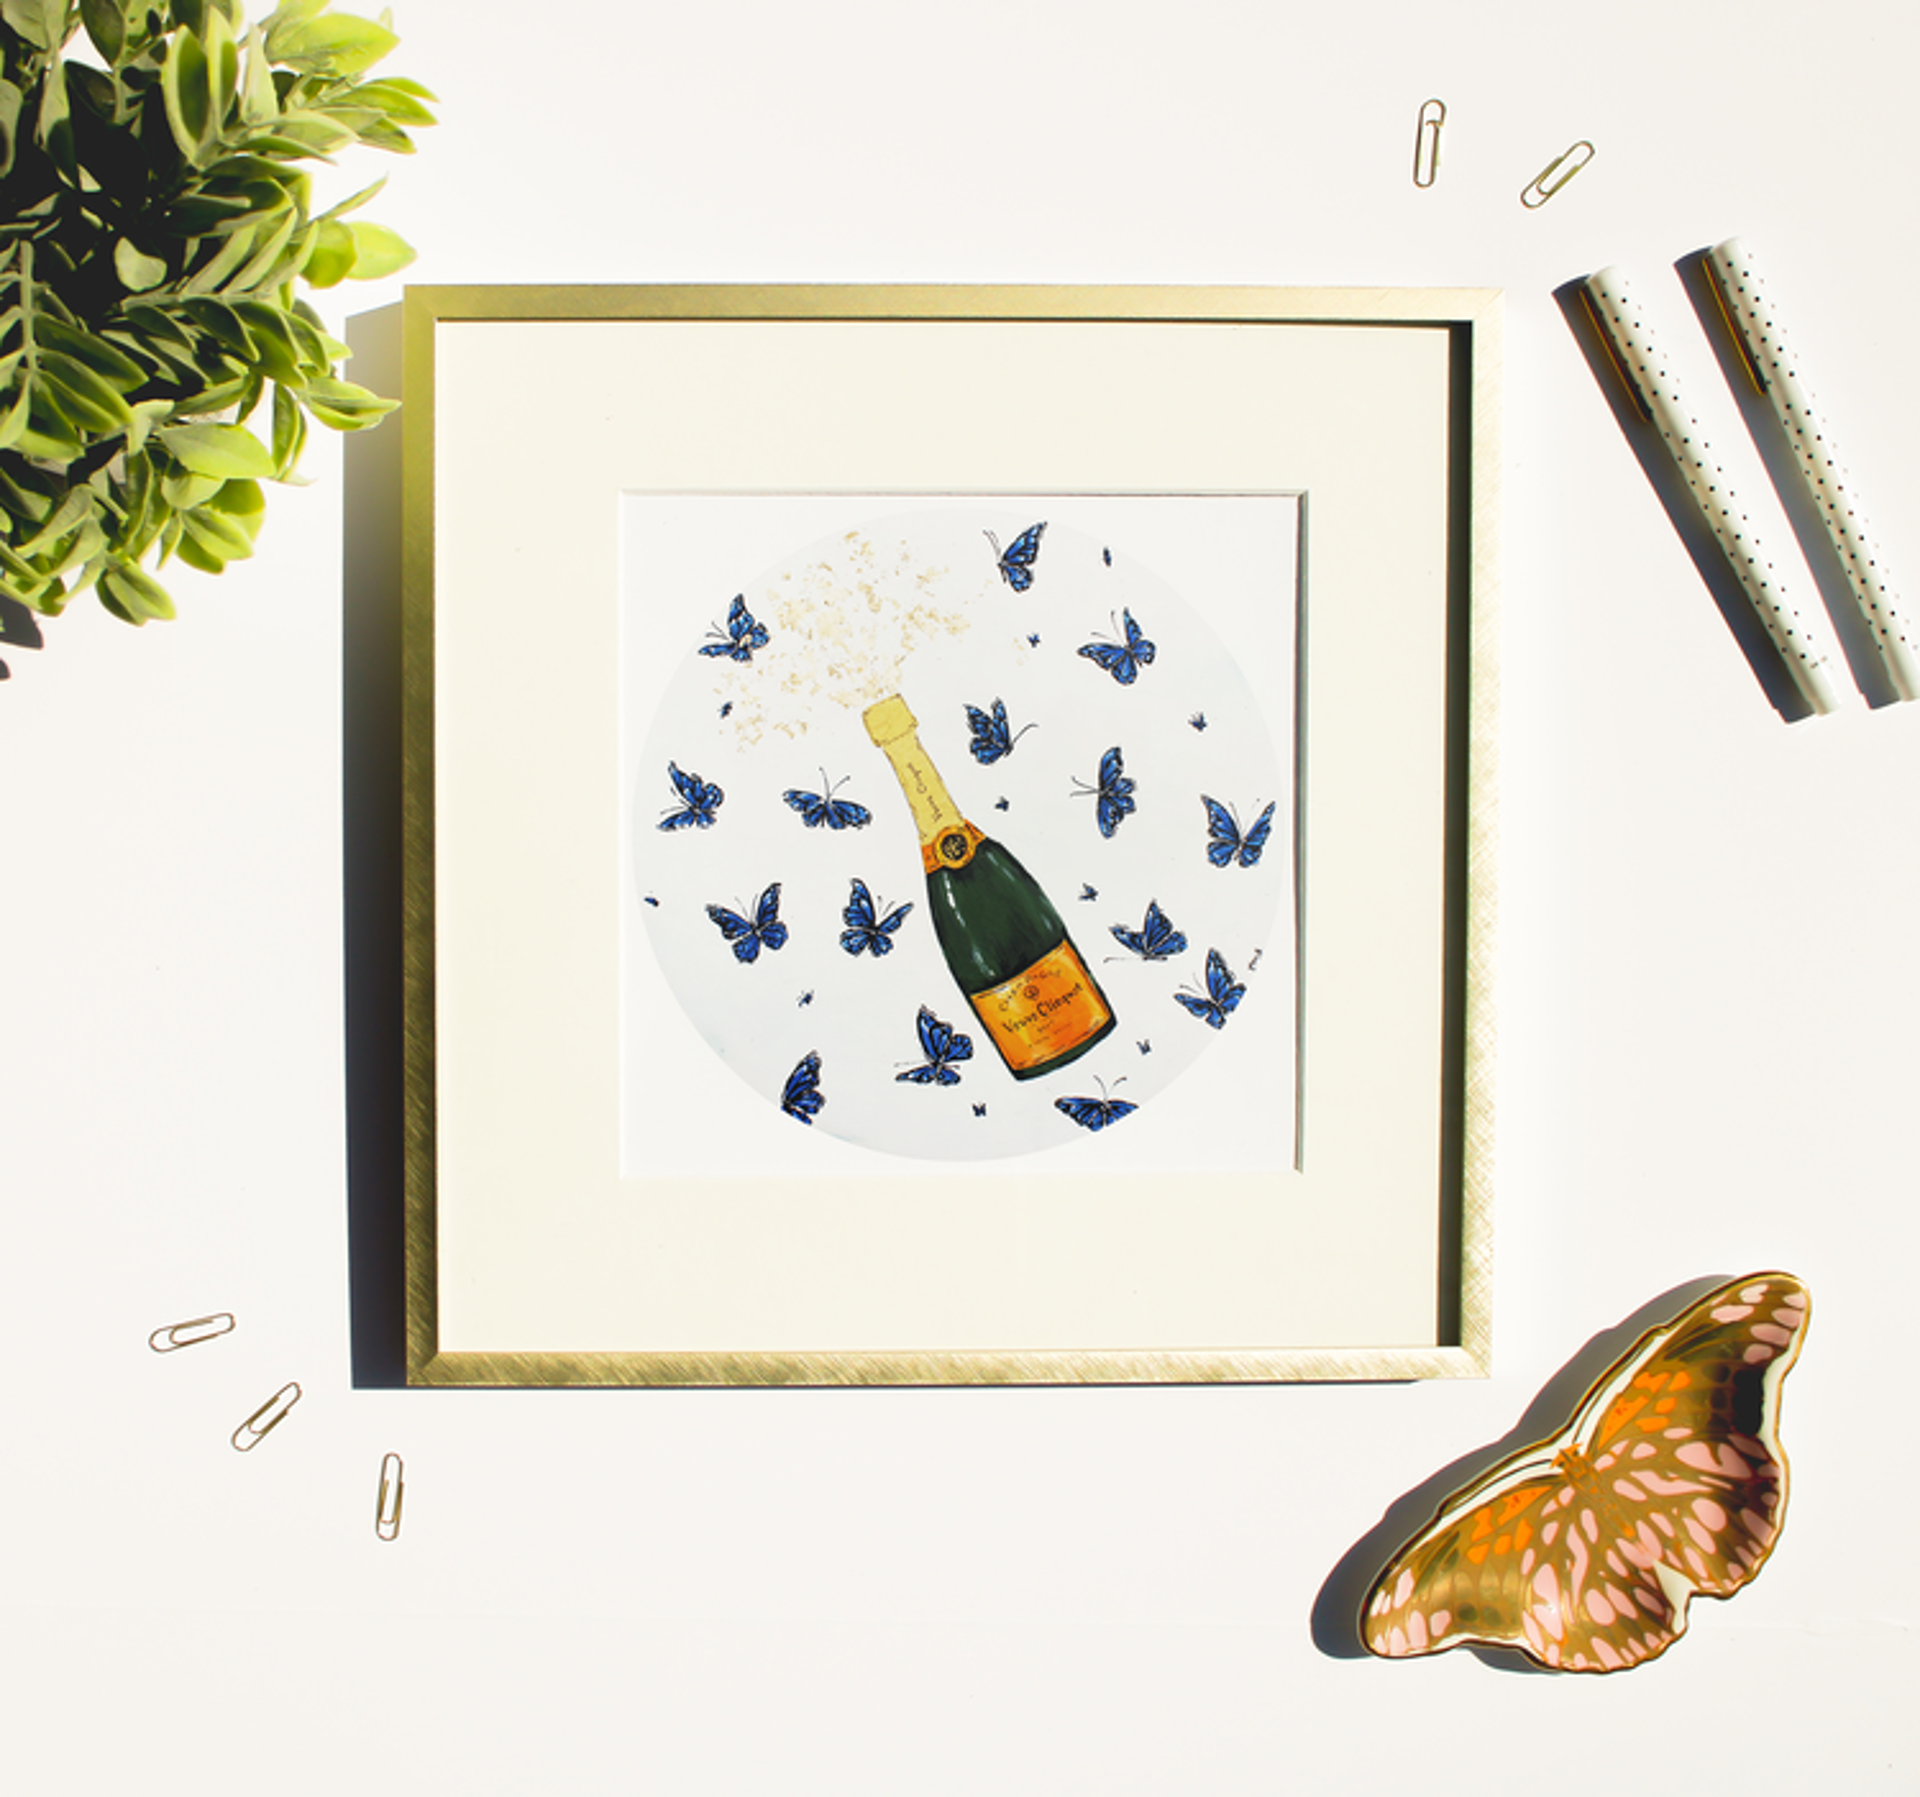 Veuve Clicquot with Butterflies Inv. # 1 by Cora Barhorst